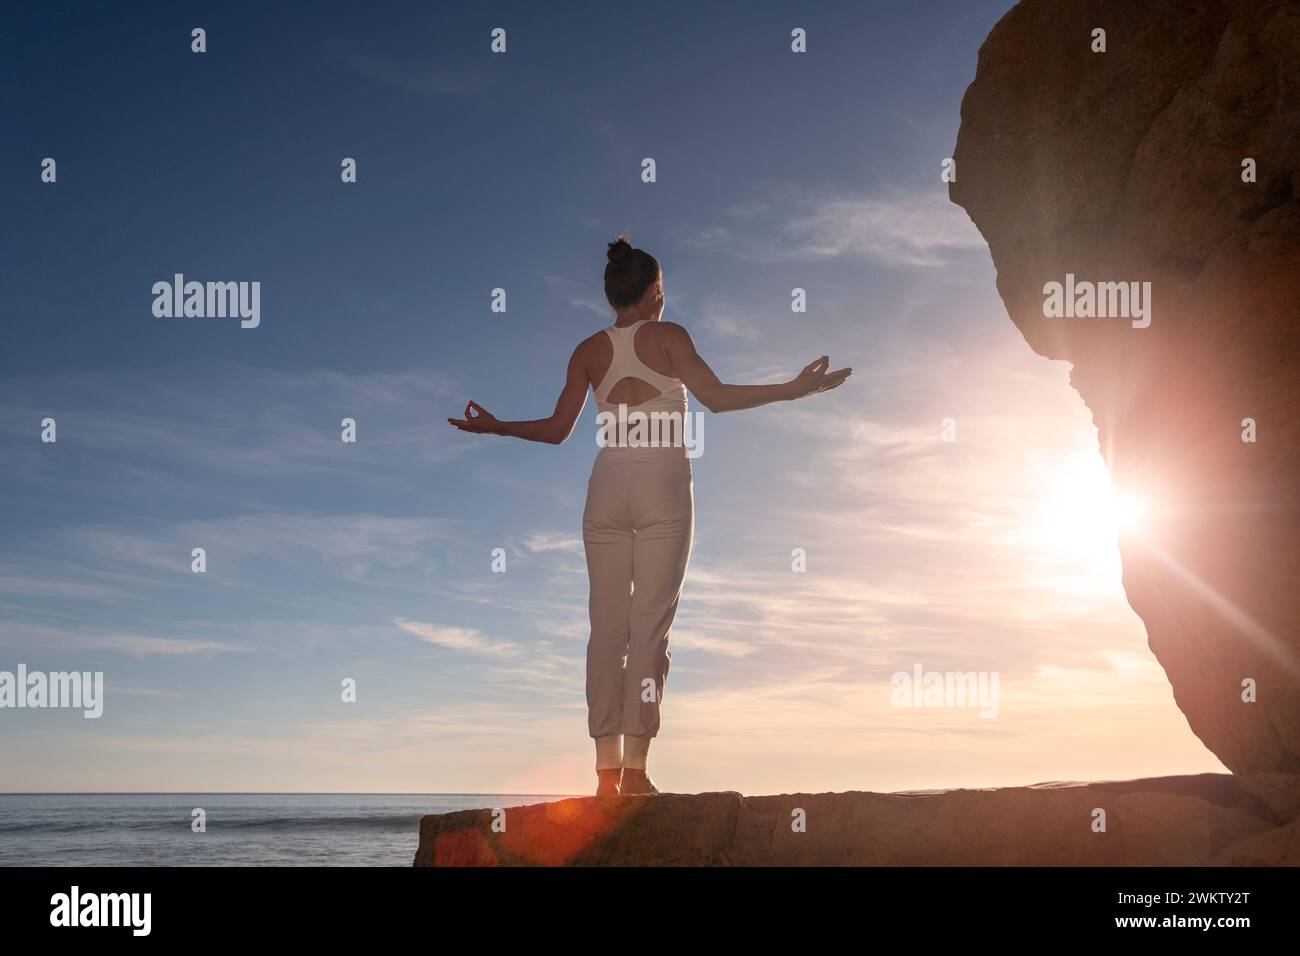 woman standing on rocks by the sea meditating at sunrise Stock Photo